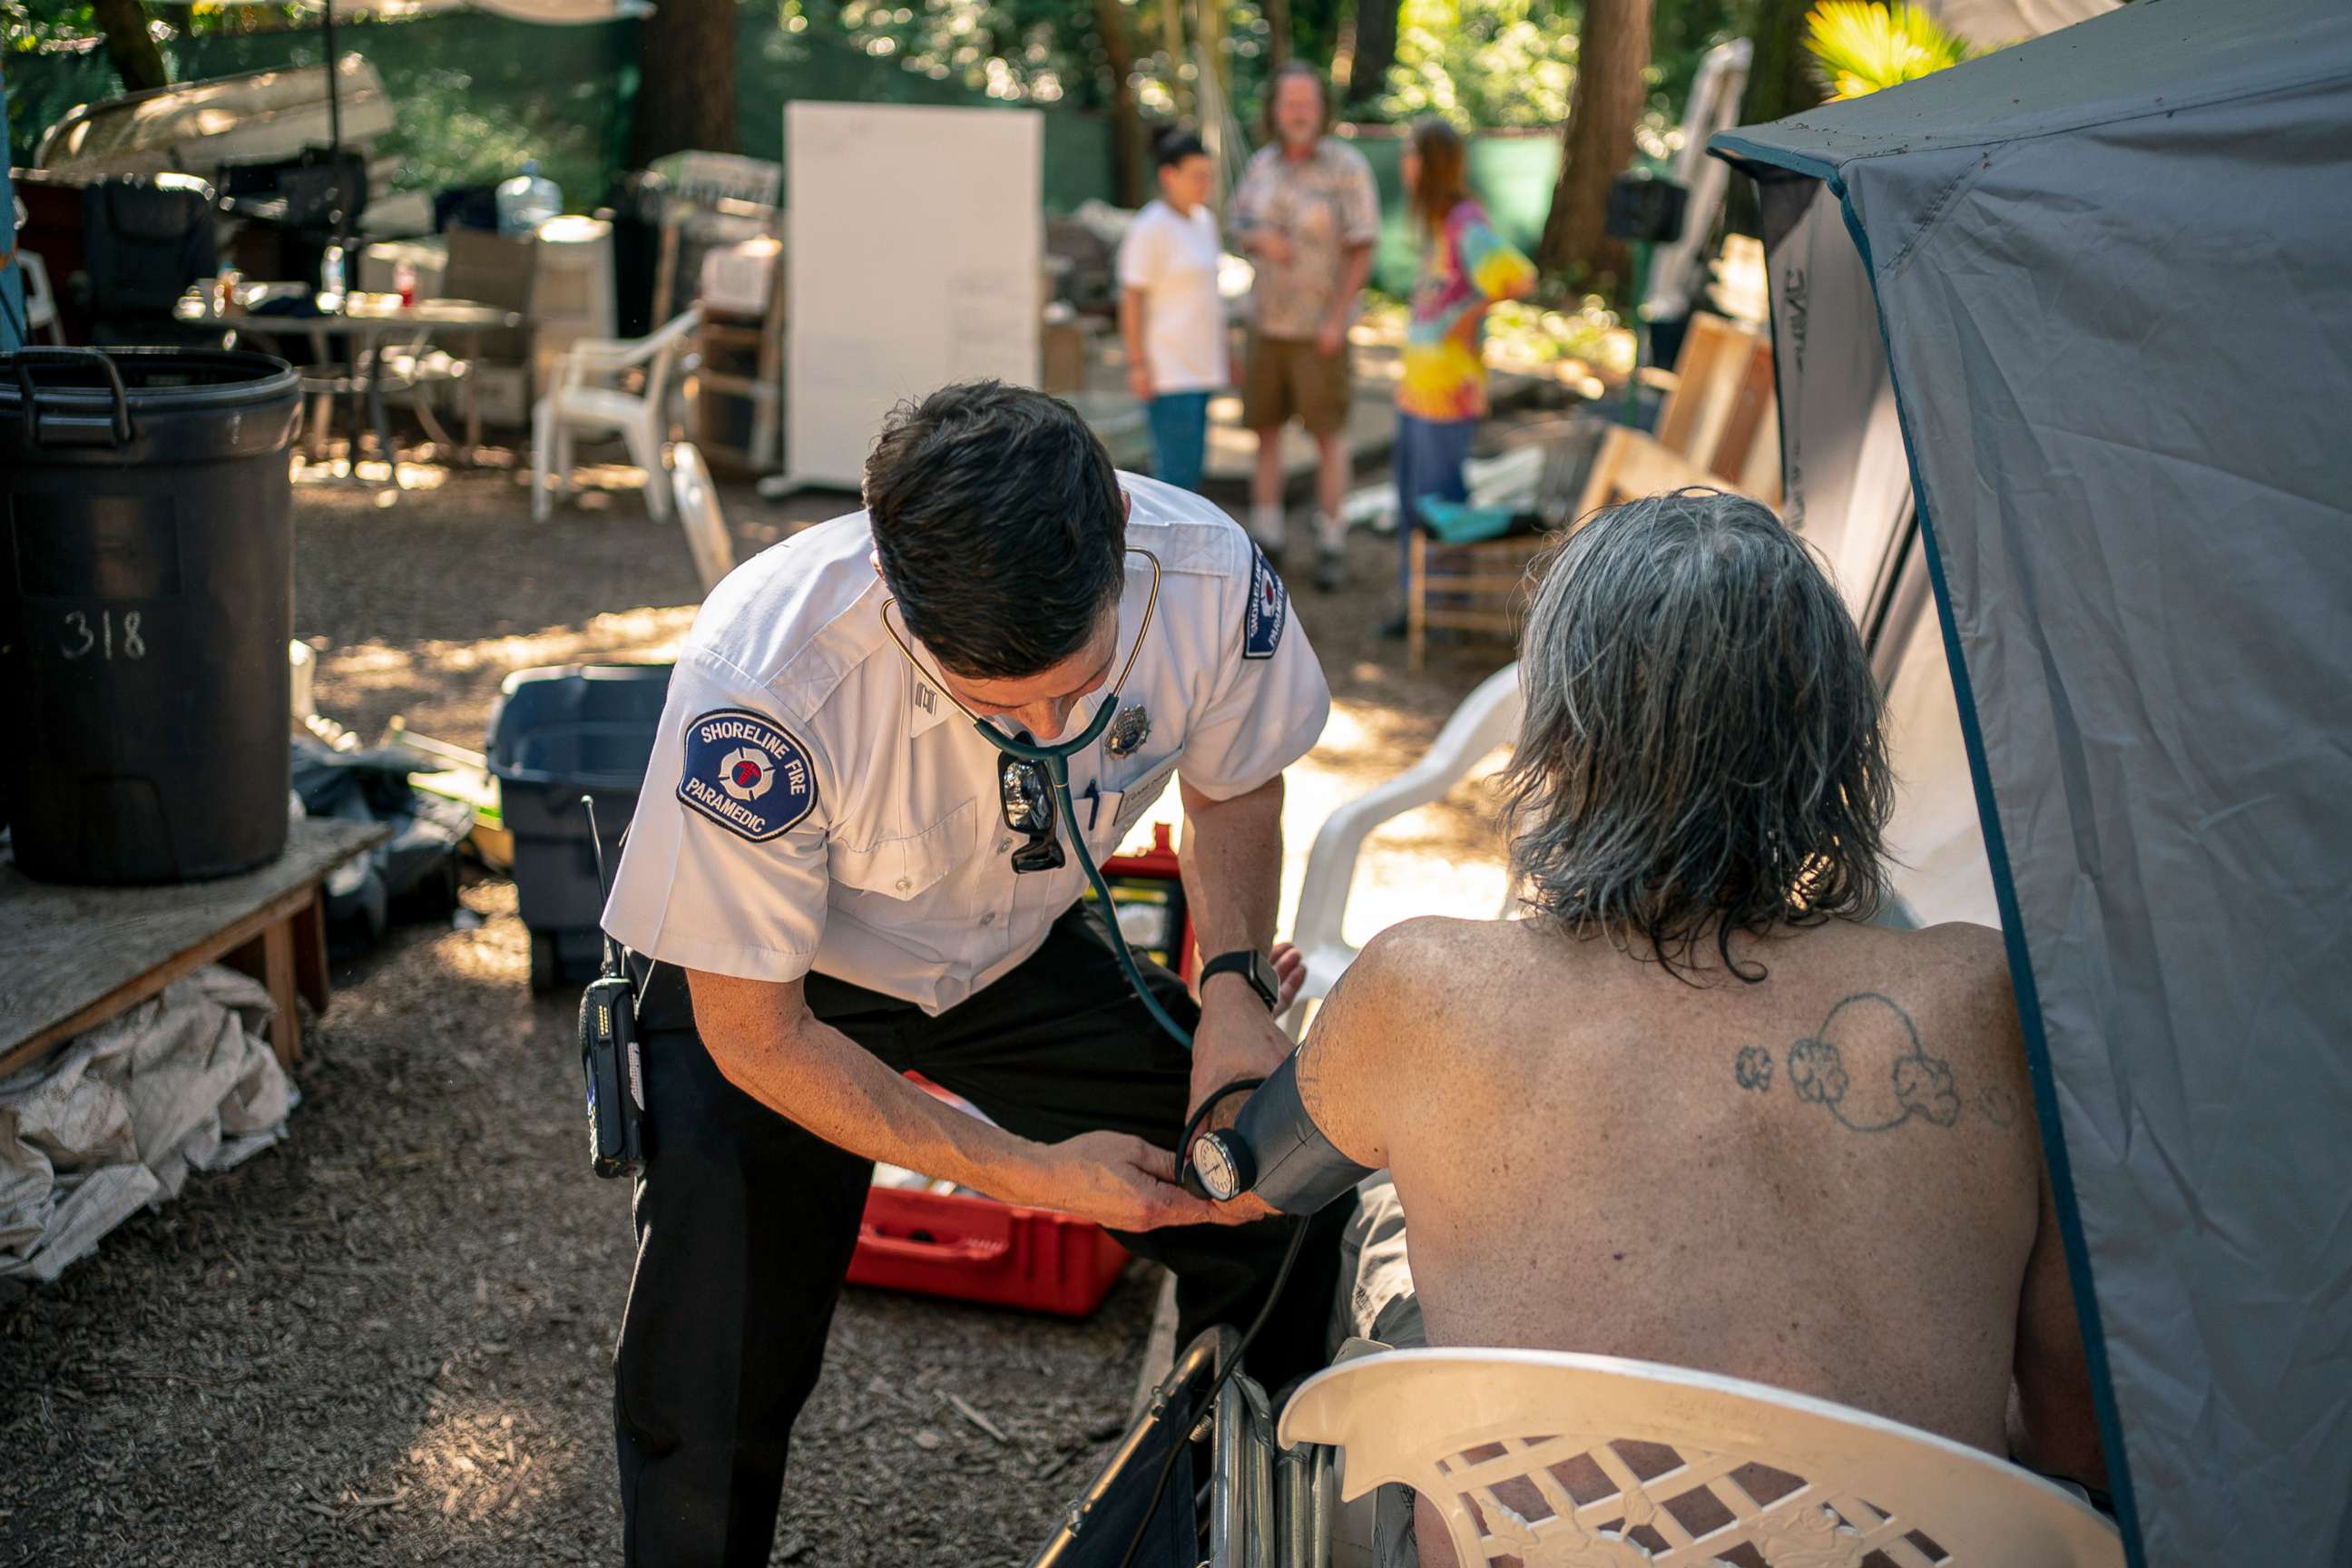 PHOTO: Gabe DeBay, Medical Services Officer with the Shoreline Fire Department, checks the blood pressure of a homeless man at a tent encampment during the hottest part of the day, July 26, 2022, in Shoreline, Wa.